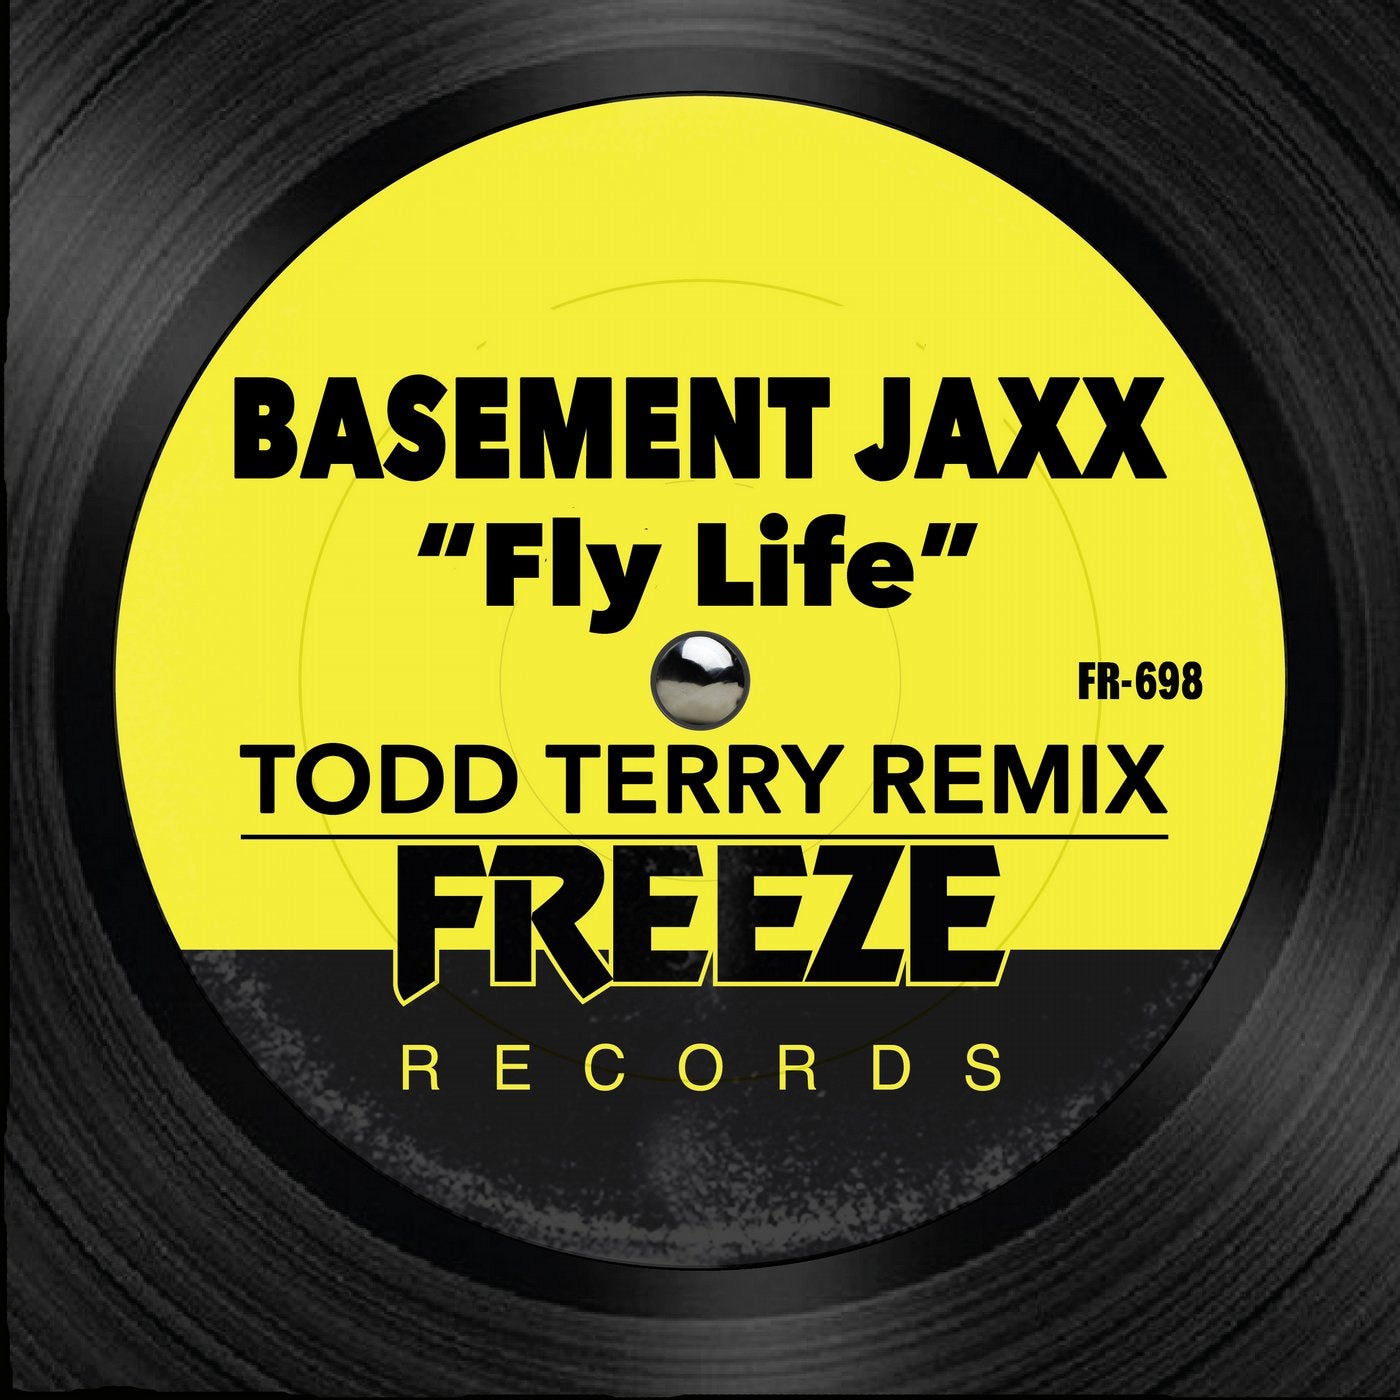 Flying my life. Basement Jaxx - Fly Life. Basement Jaxx - Fly Life Paco Osuna Remix. Basement Jaxx take me back to your House певица. Todd Terry Dancing Heat.